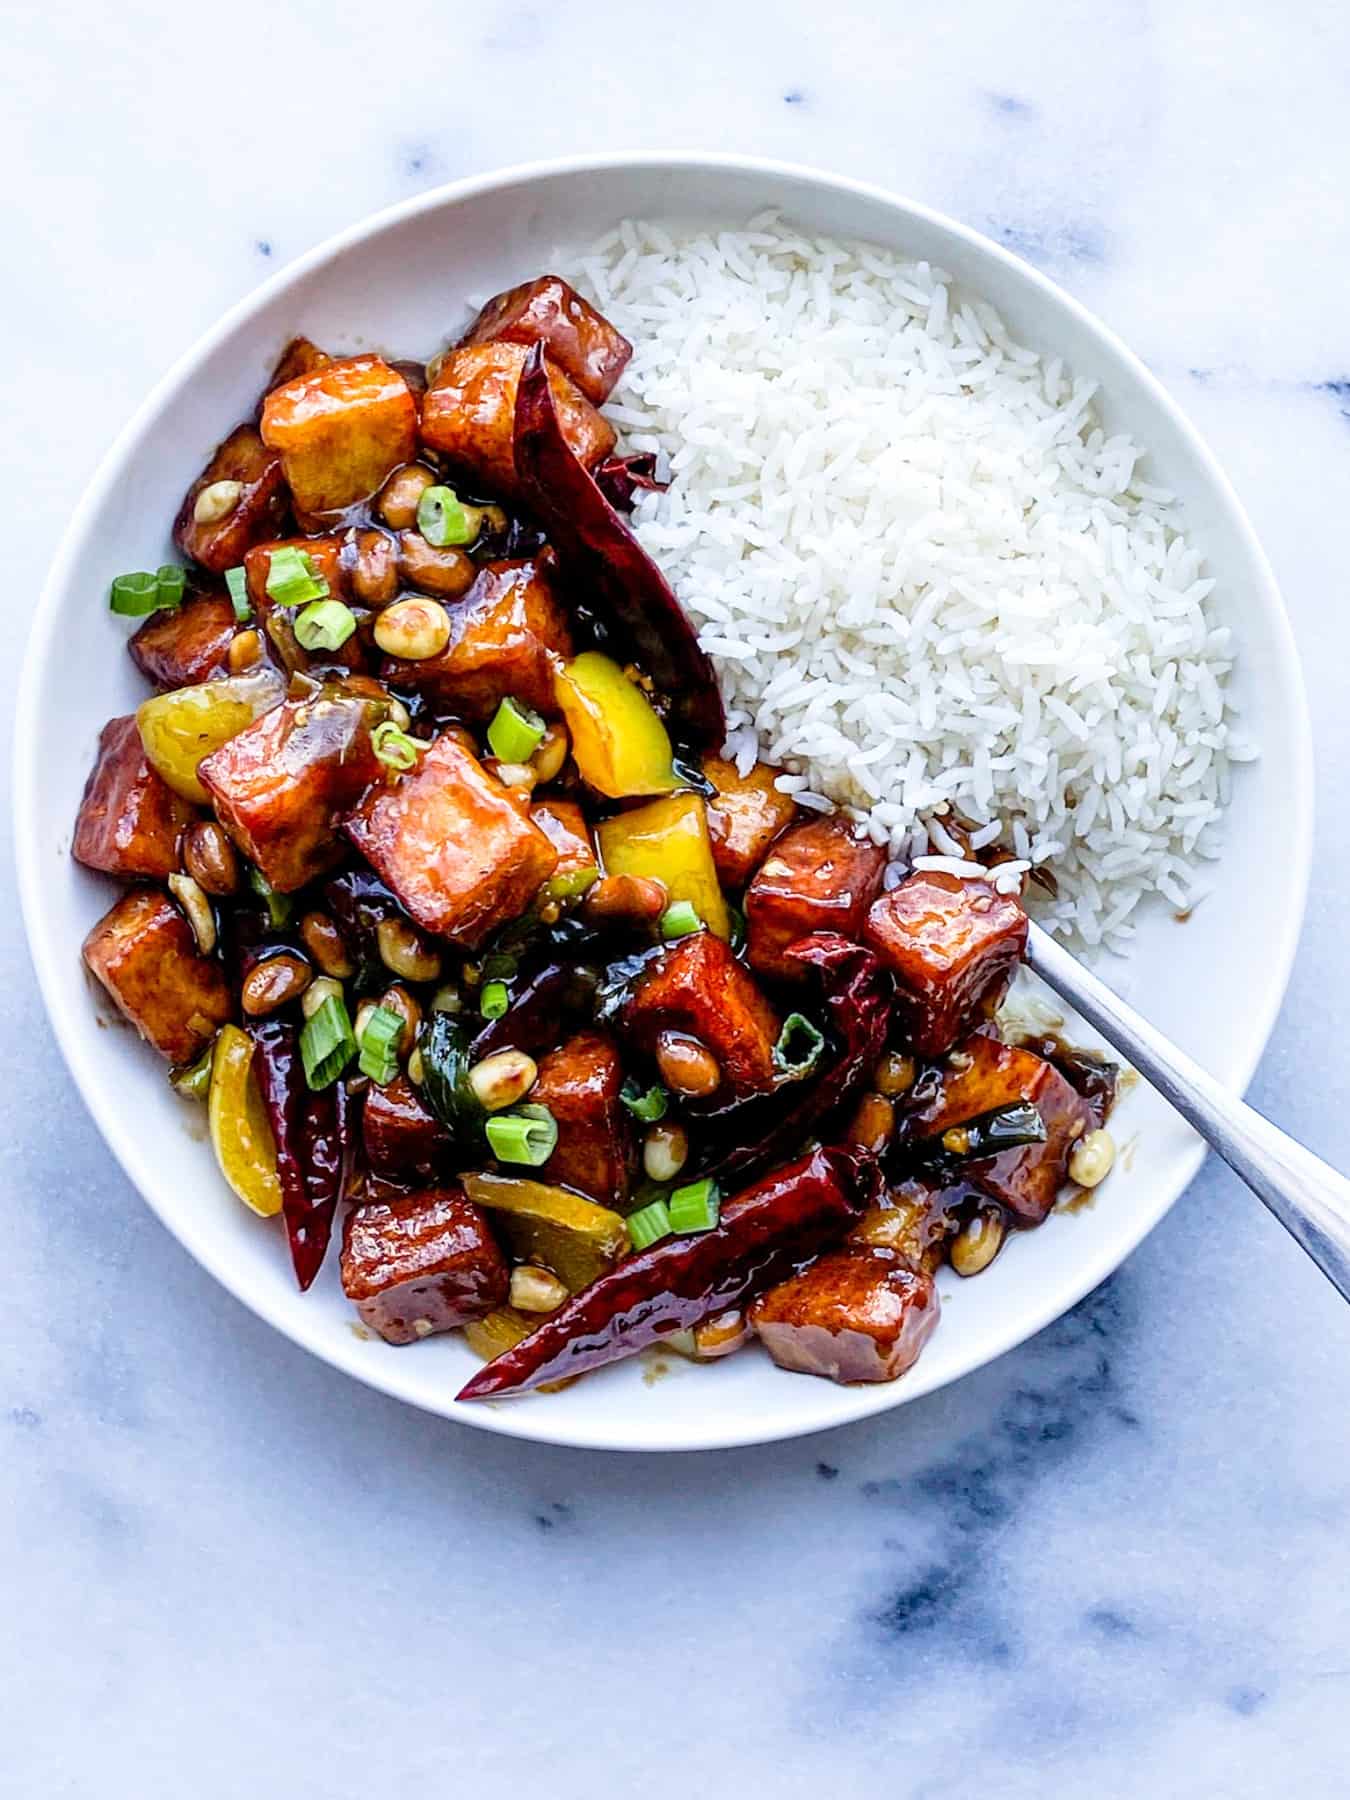 kung pao paneer recipe Indian style.